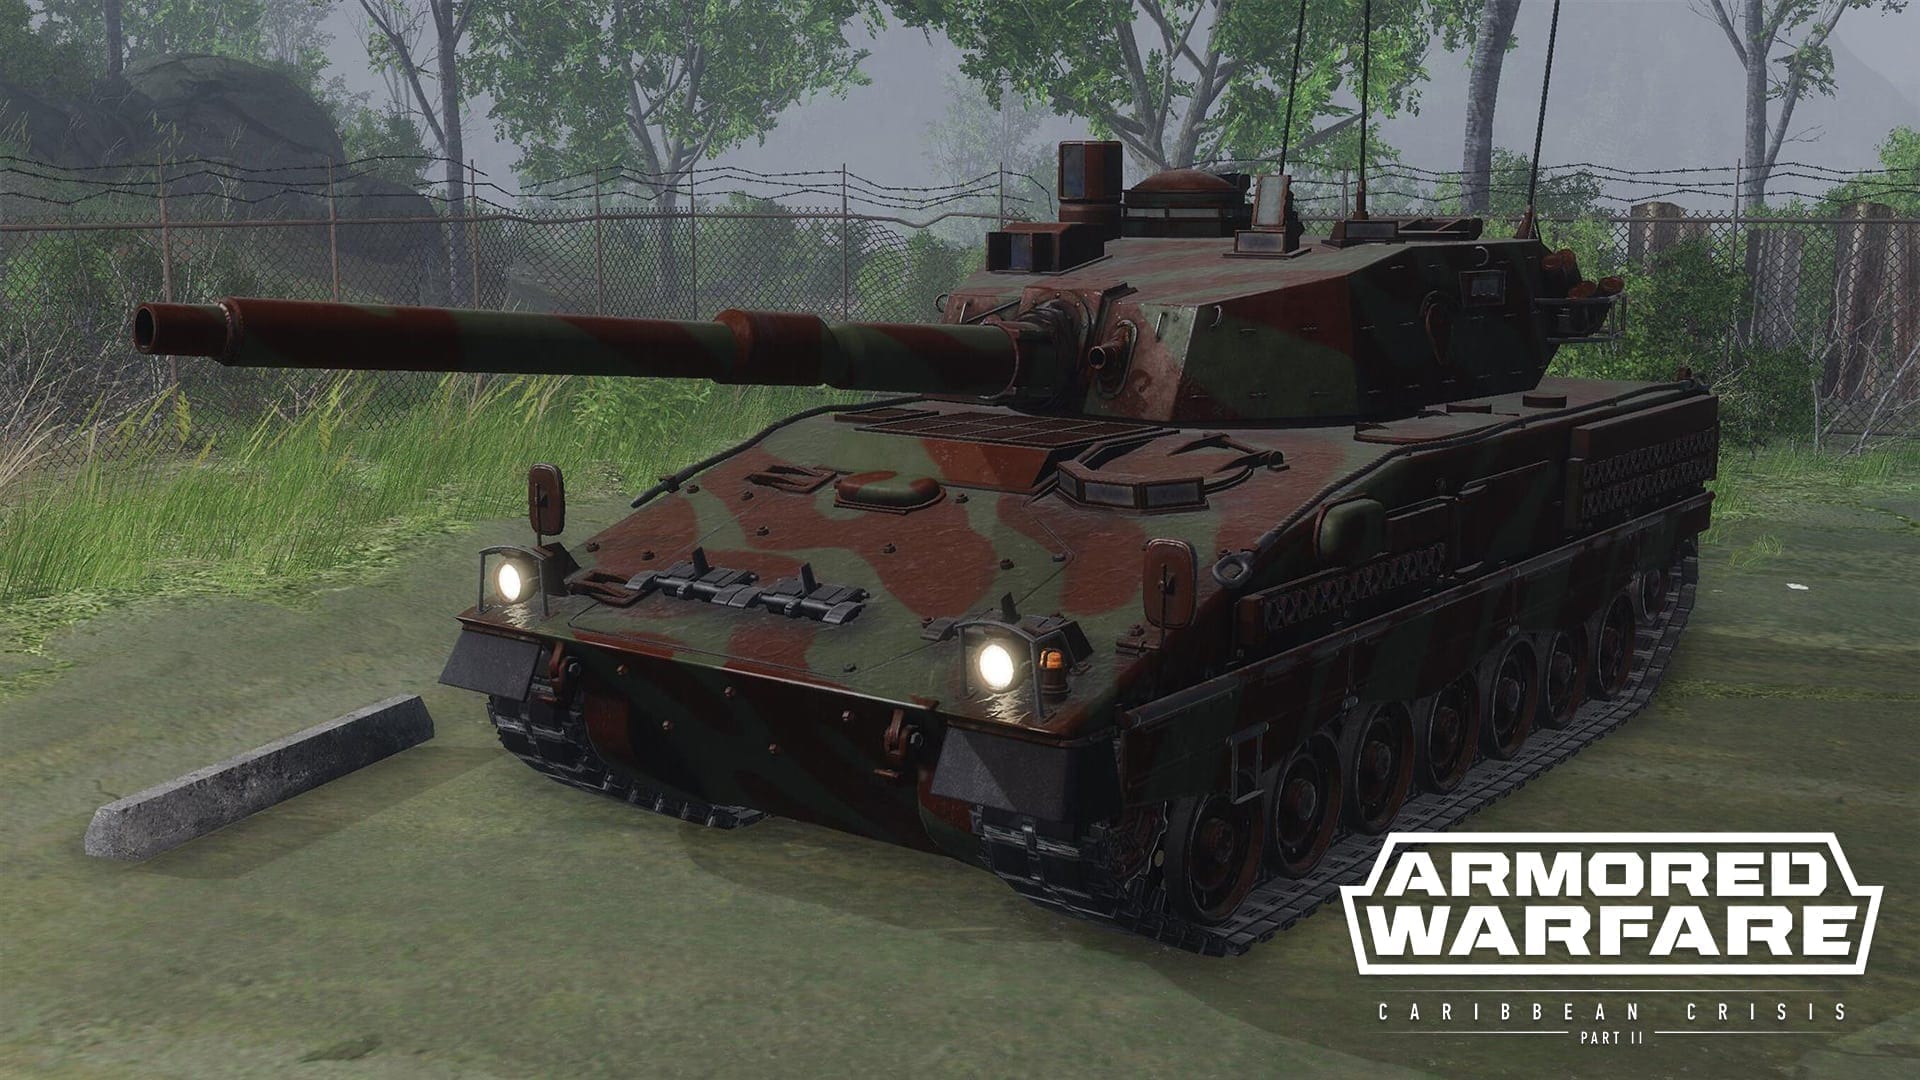 Armored Warfare Second Part Of Caribbean Crisis Content Update Goes Live Mmo Culture